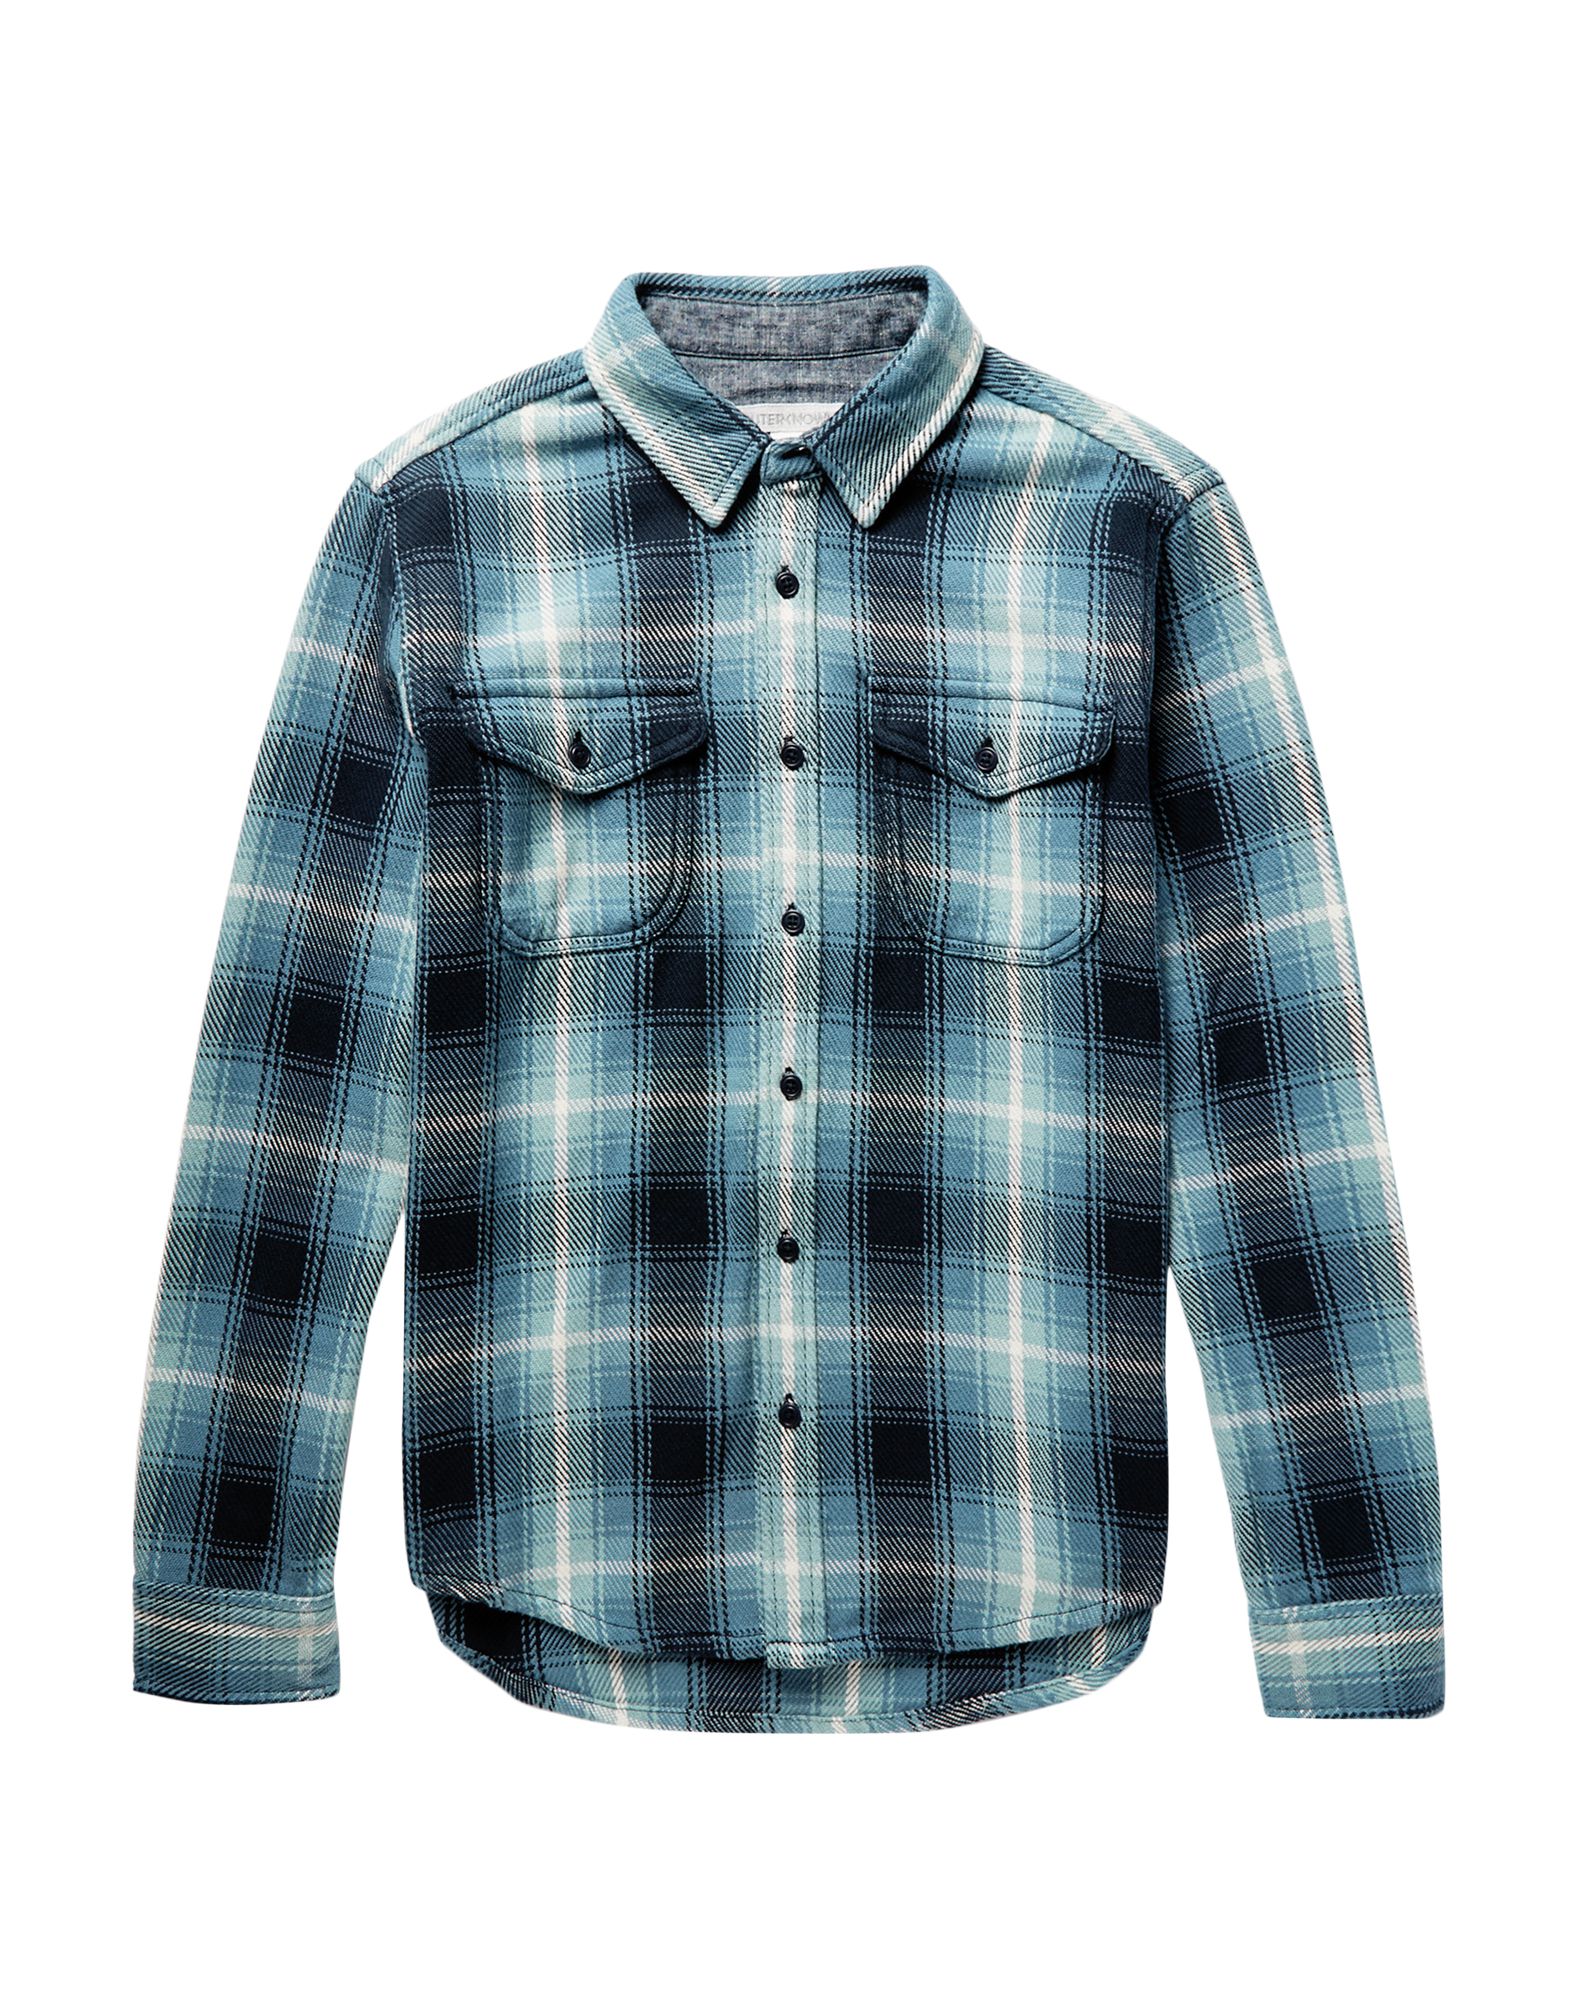 OUTERKNOWN Checked shirt,38746786HO 4